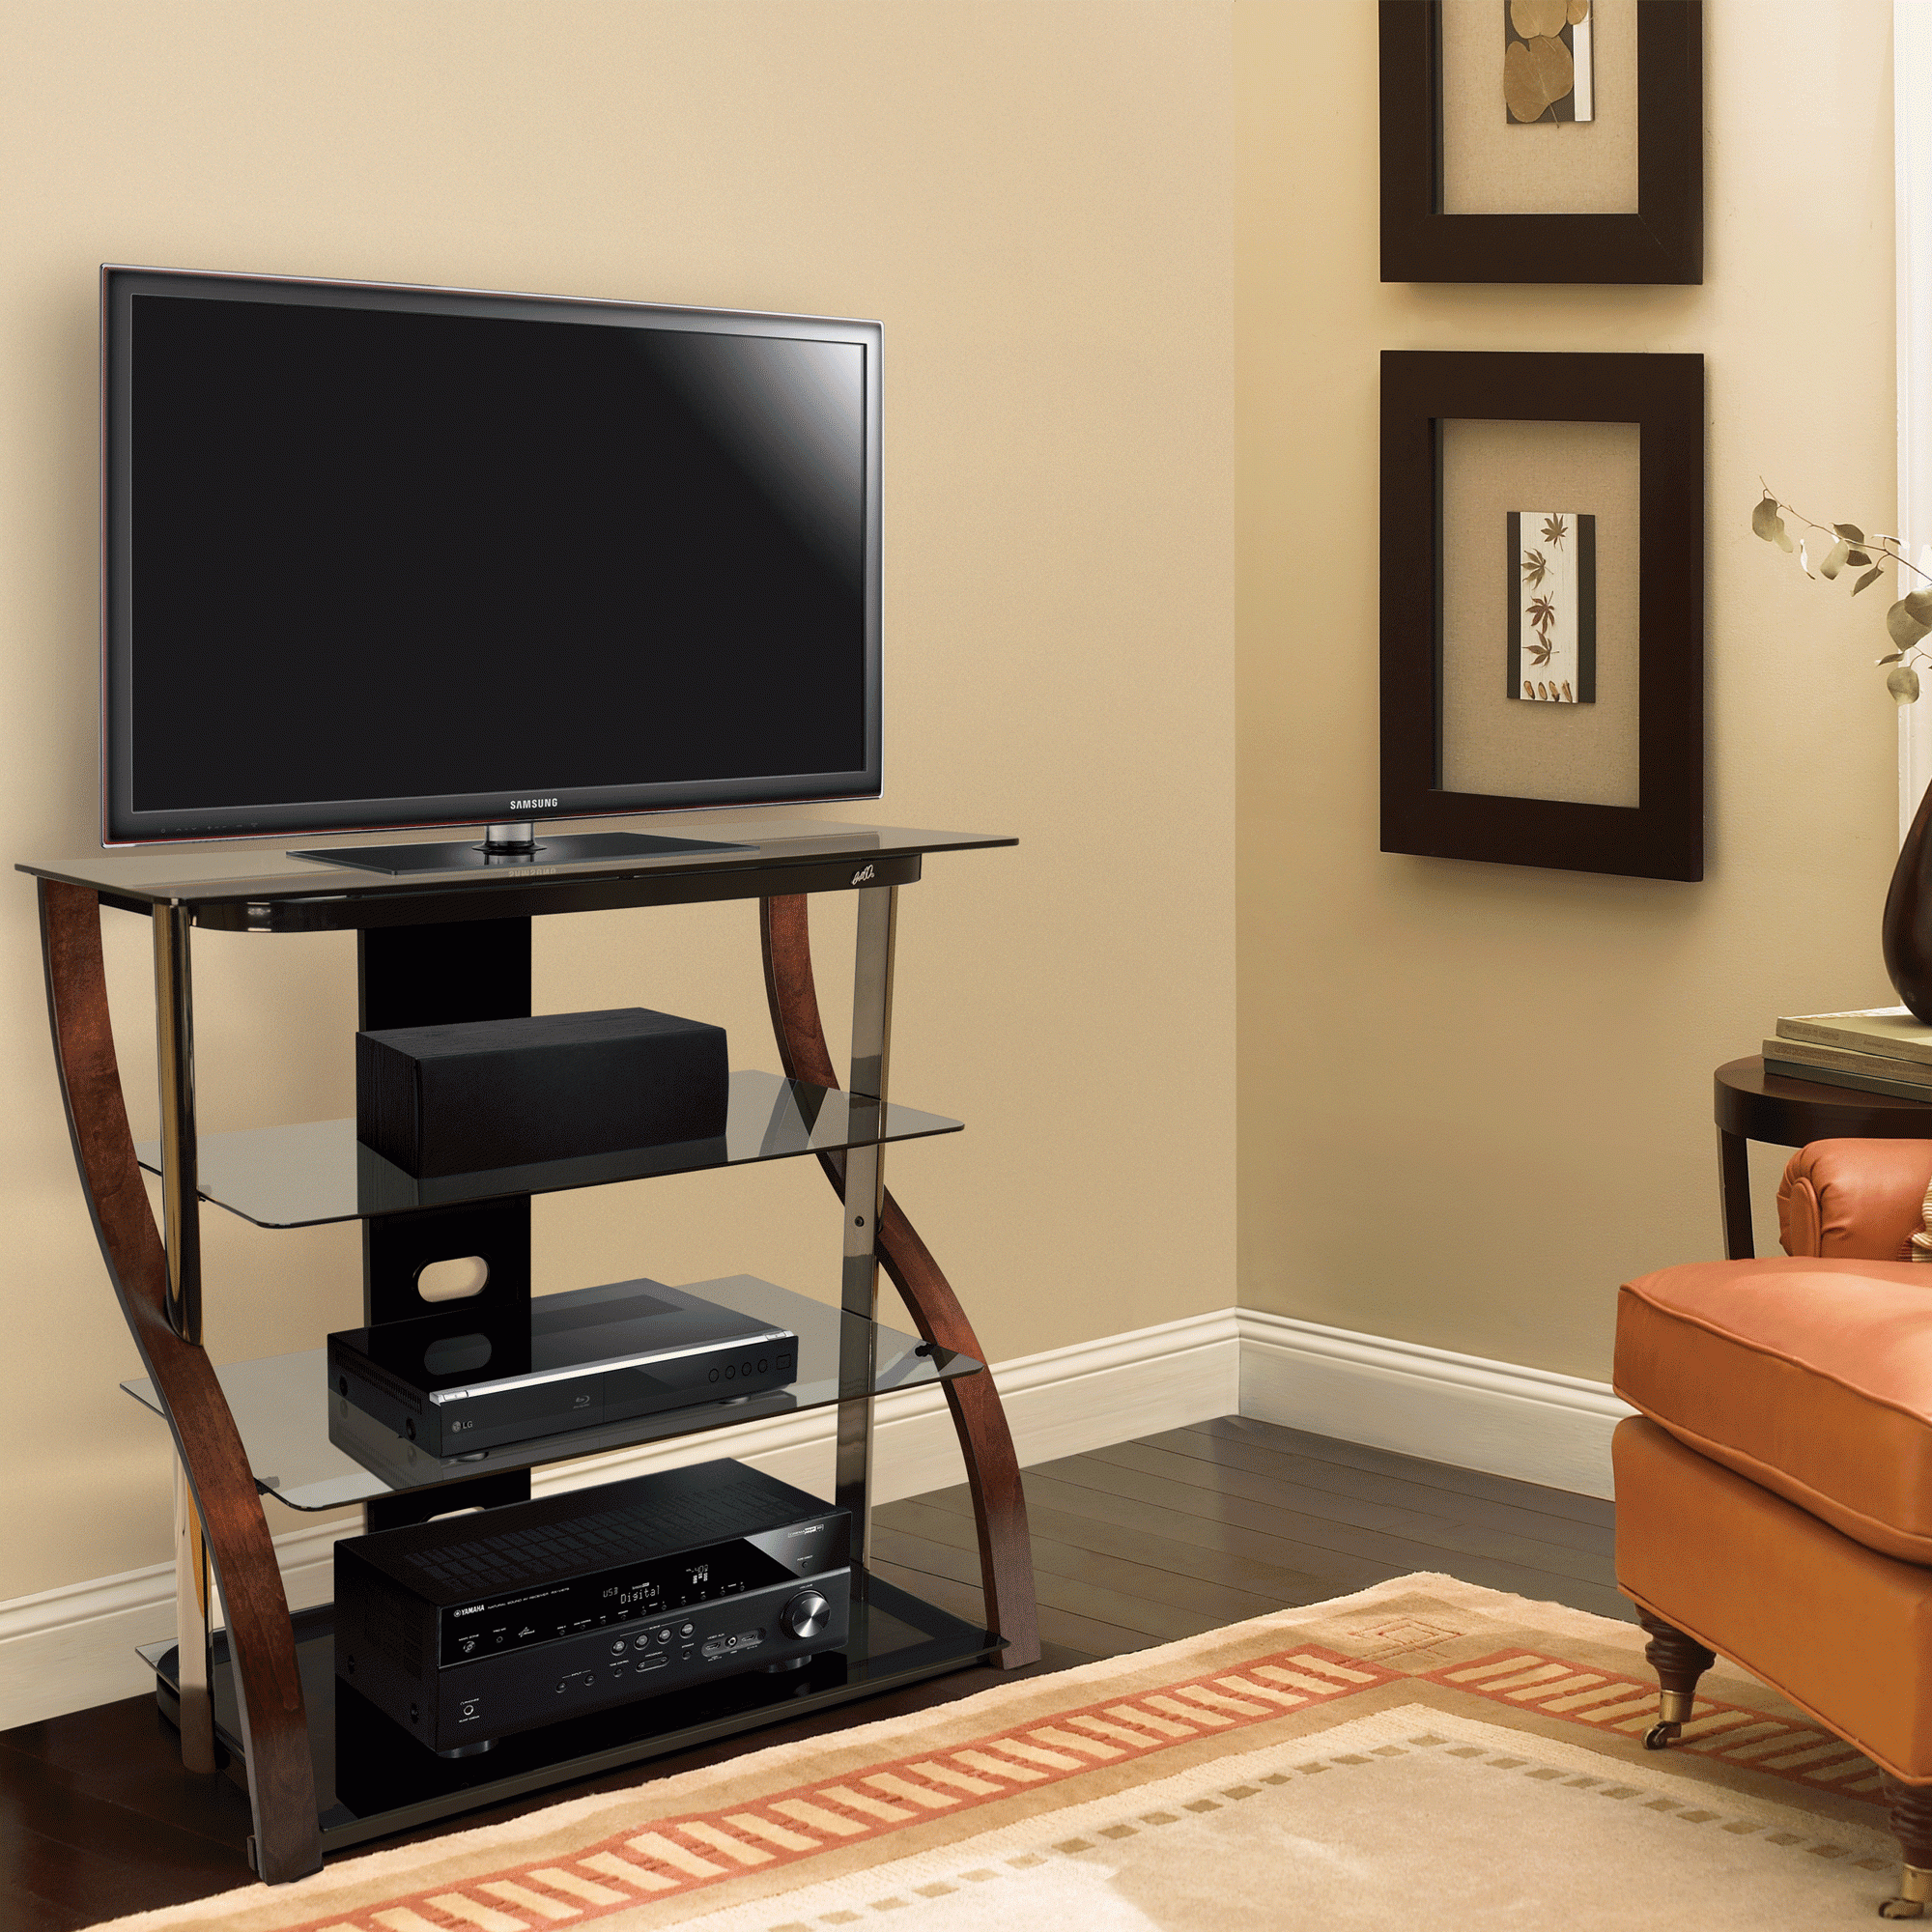 40" Tall Tv Stand For Tvs Up To 42", Espresso | Bedroom Tv Stand, Black With Cafe Tv Stands With Storage (View 17 of 20)